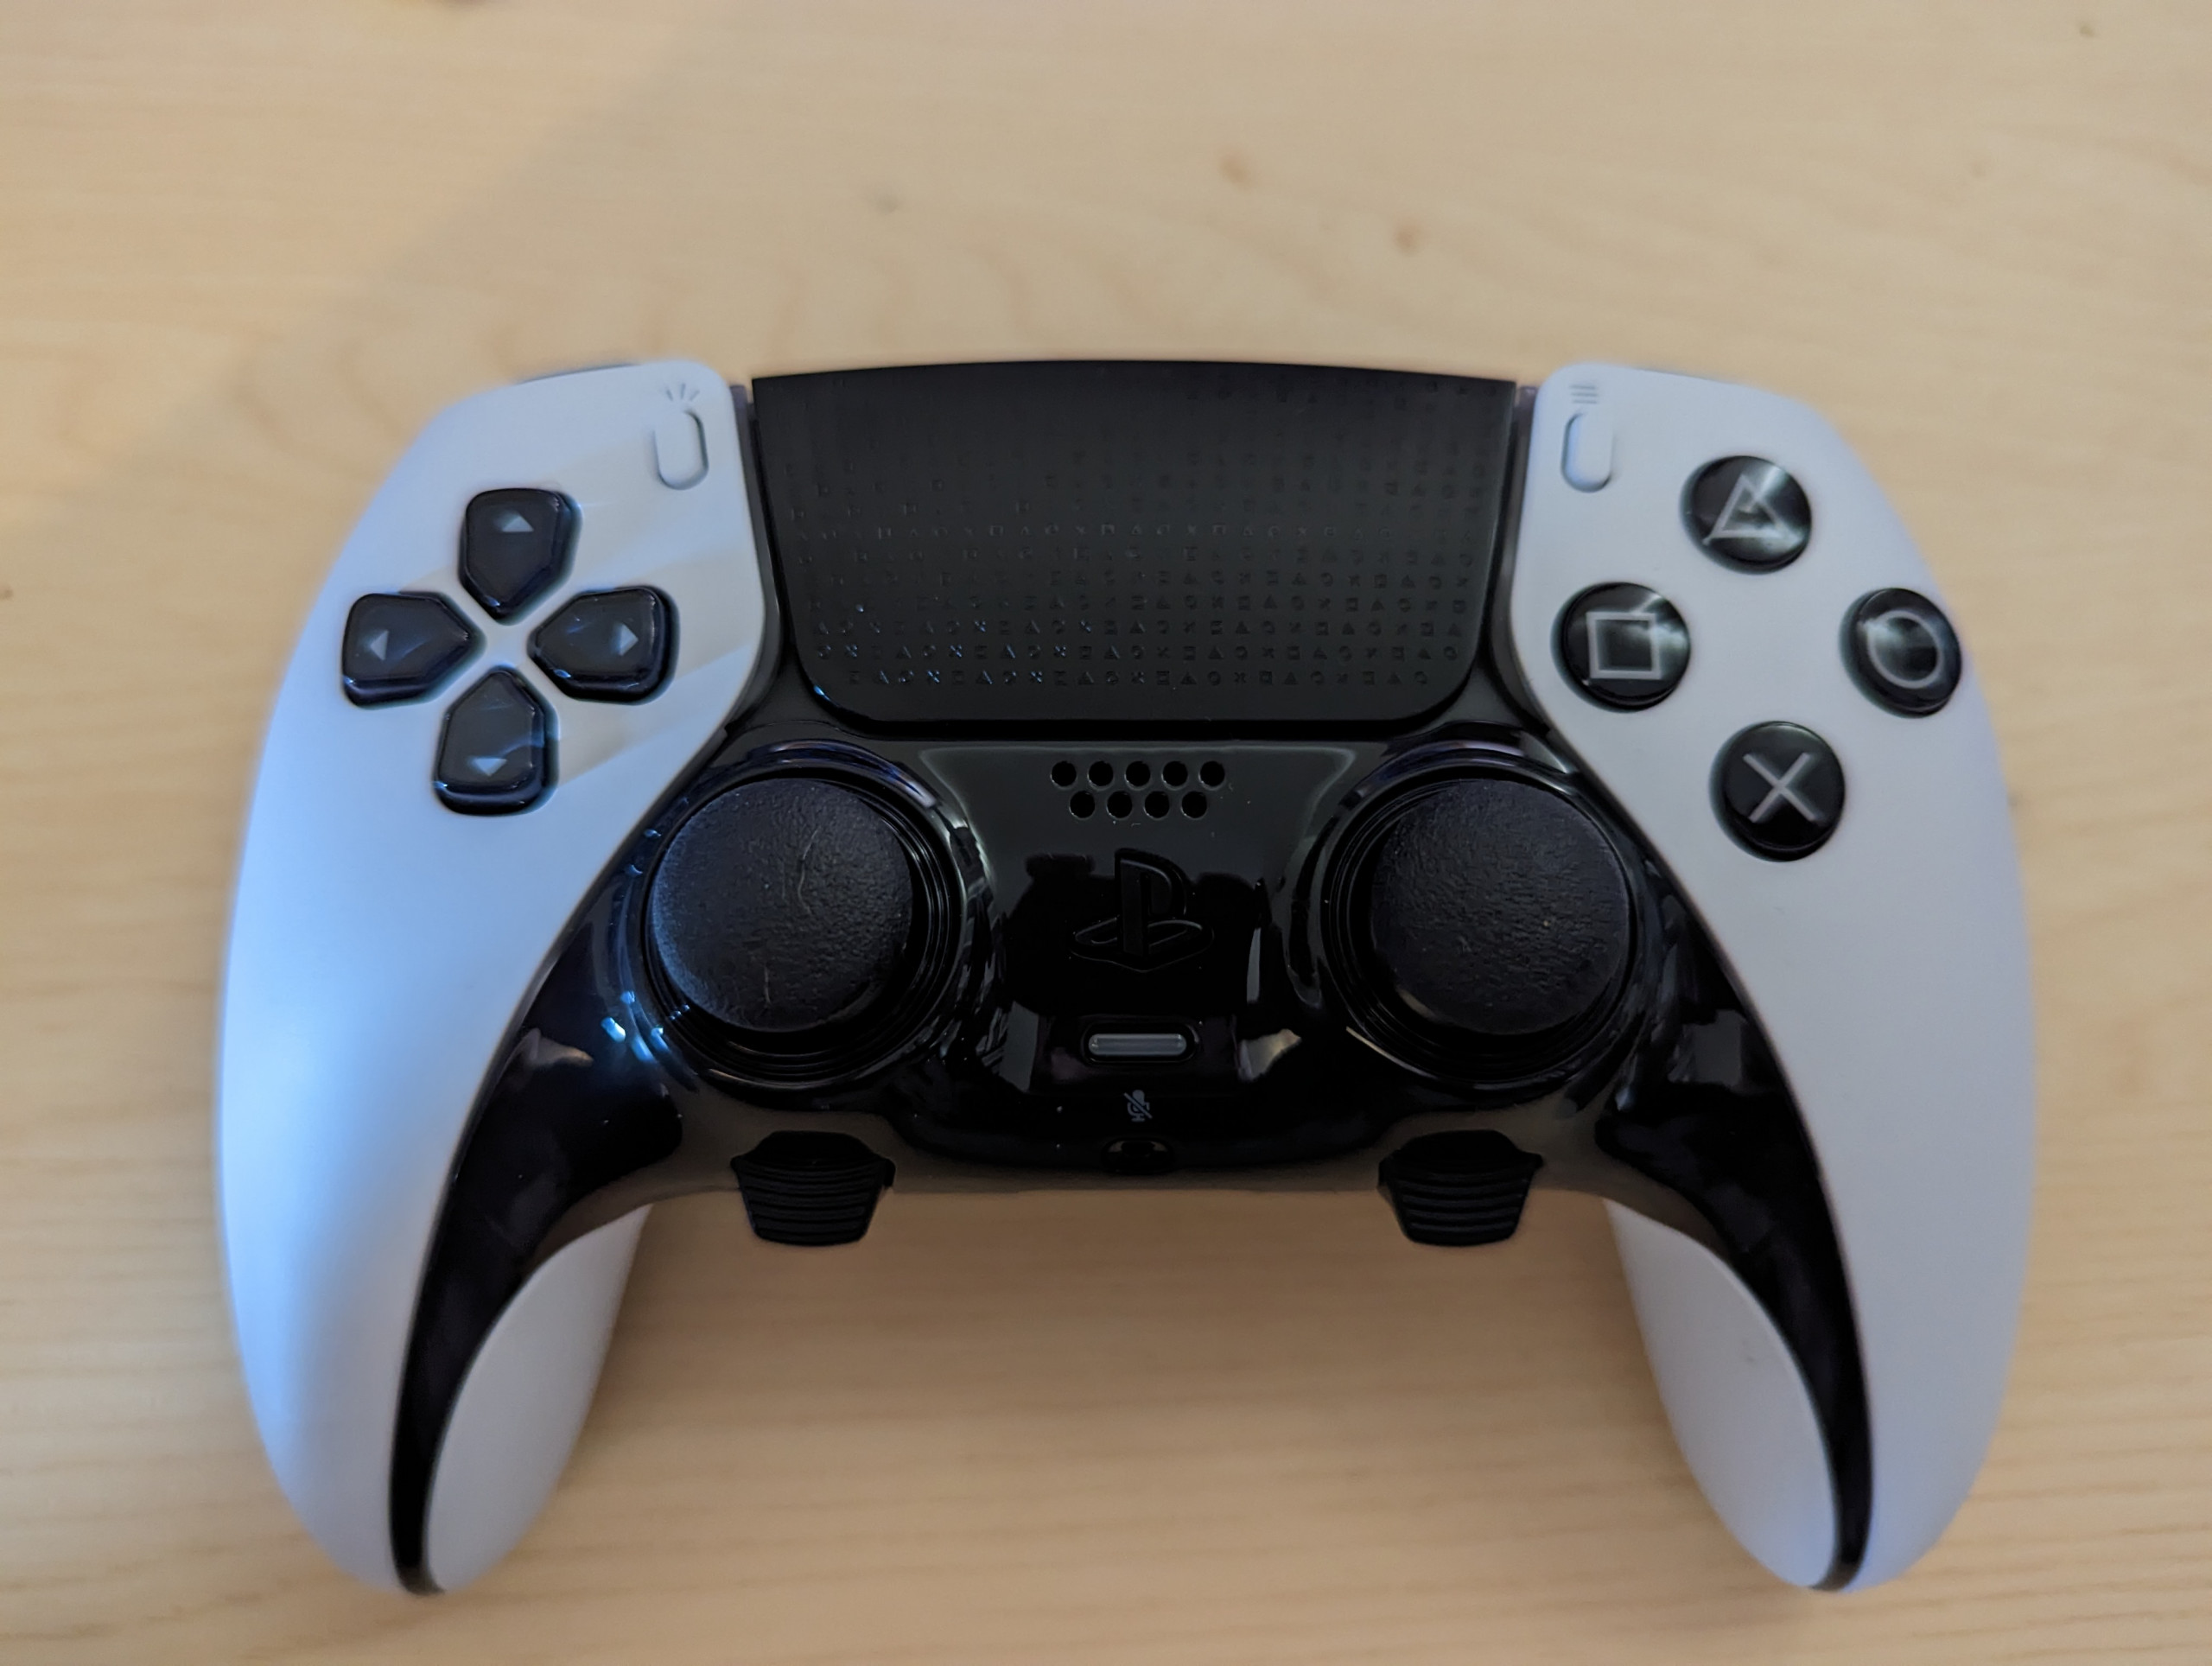 The Dualsense Edge controller with the 2 function buttons